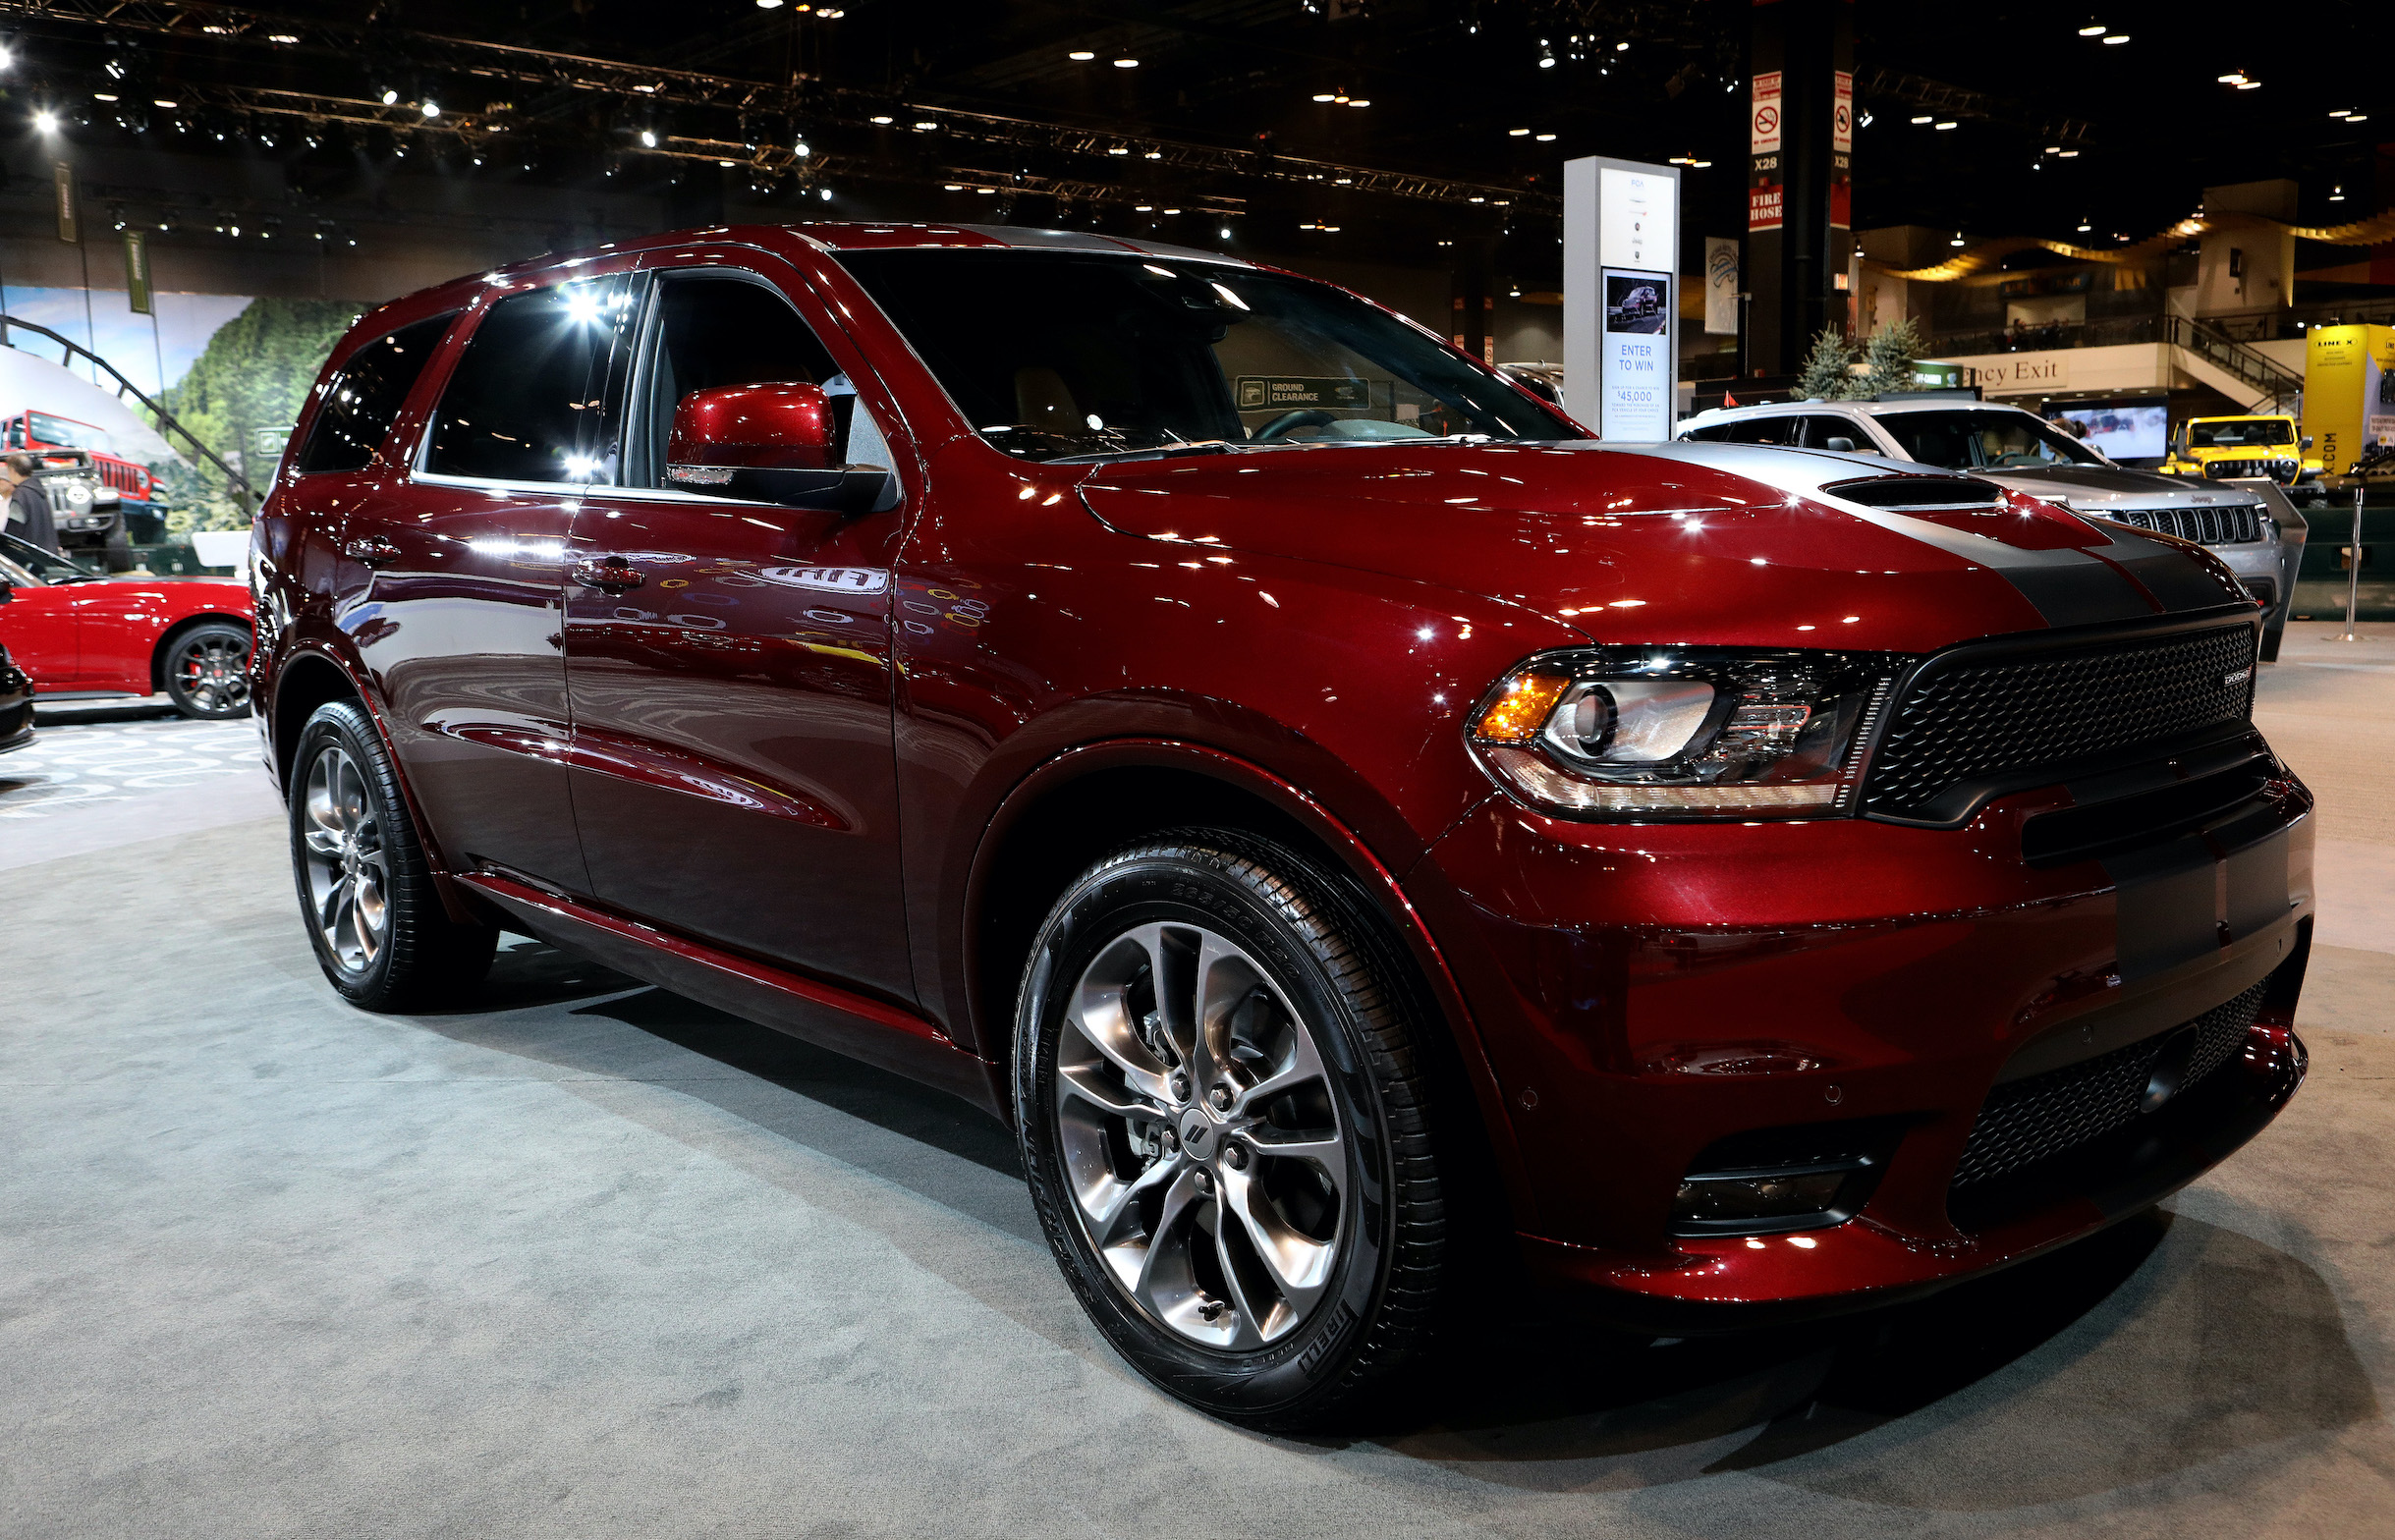 2019 Dodge Durango is on display at the 111th Annual Chicago Auto Show